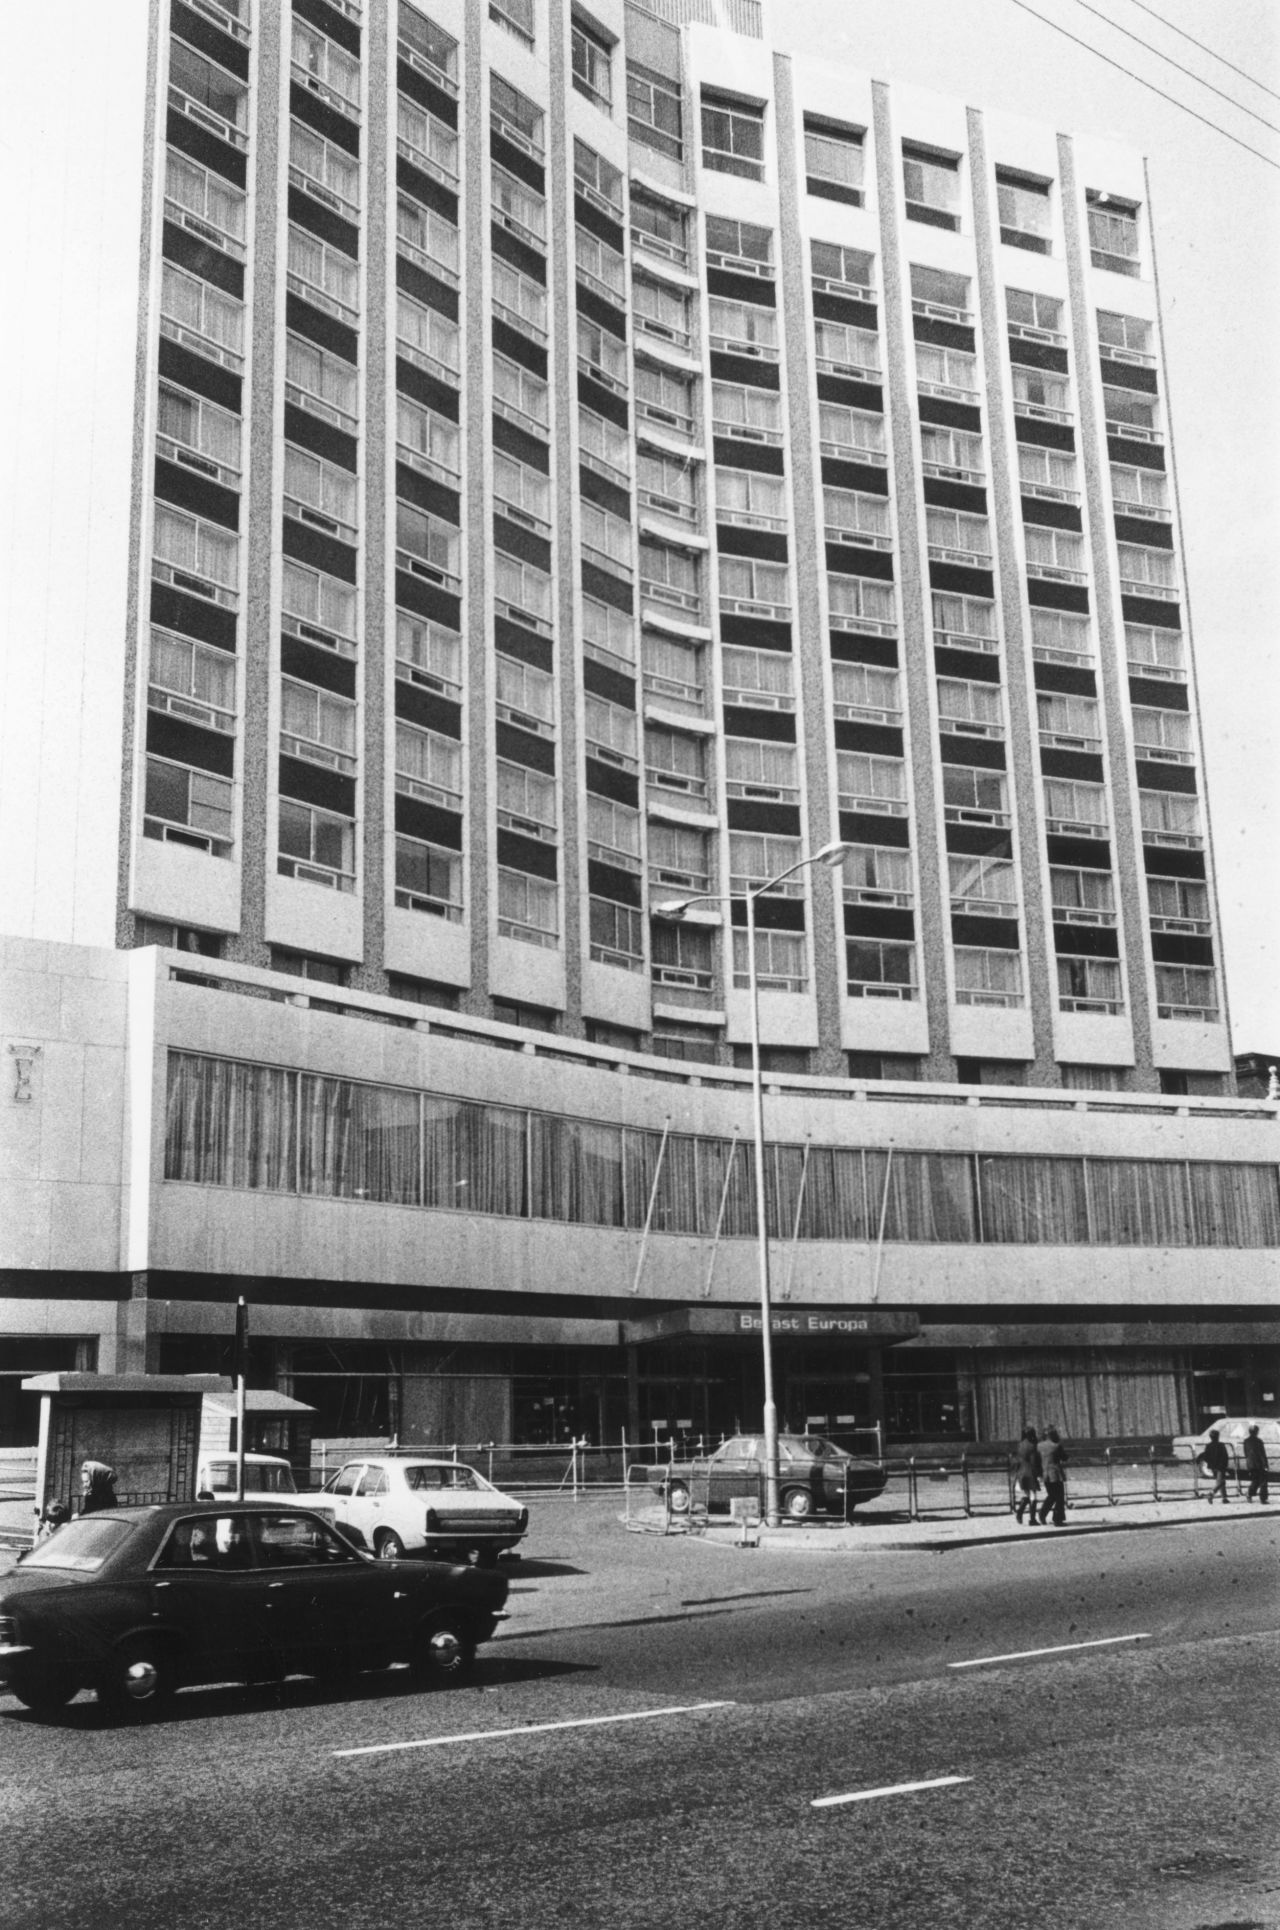 Thompson, along with horse racing journalists John Oaksey and Peter Campling stayed at the Europa Hotel in Belfast, known as the 'most bombed hotel in Europe.'